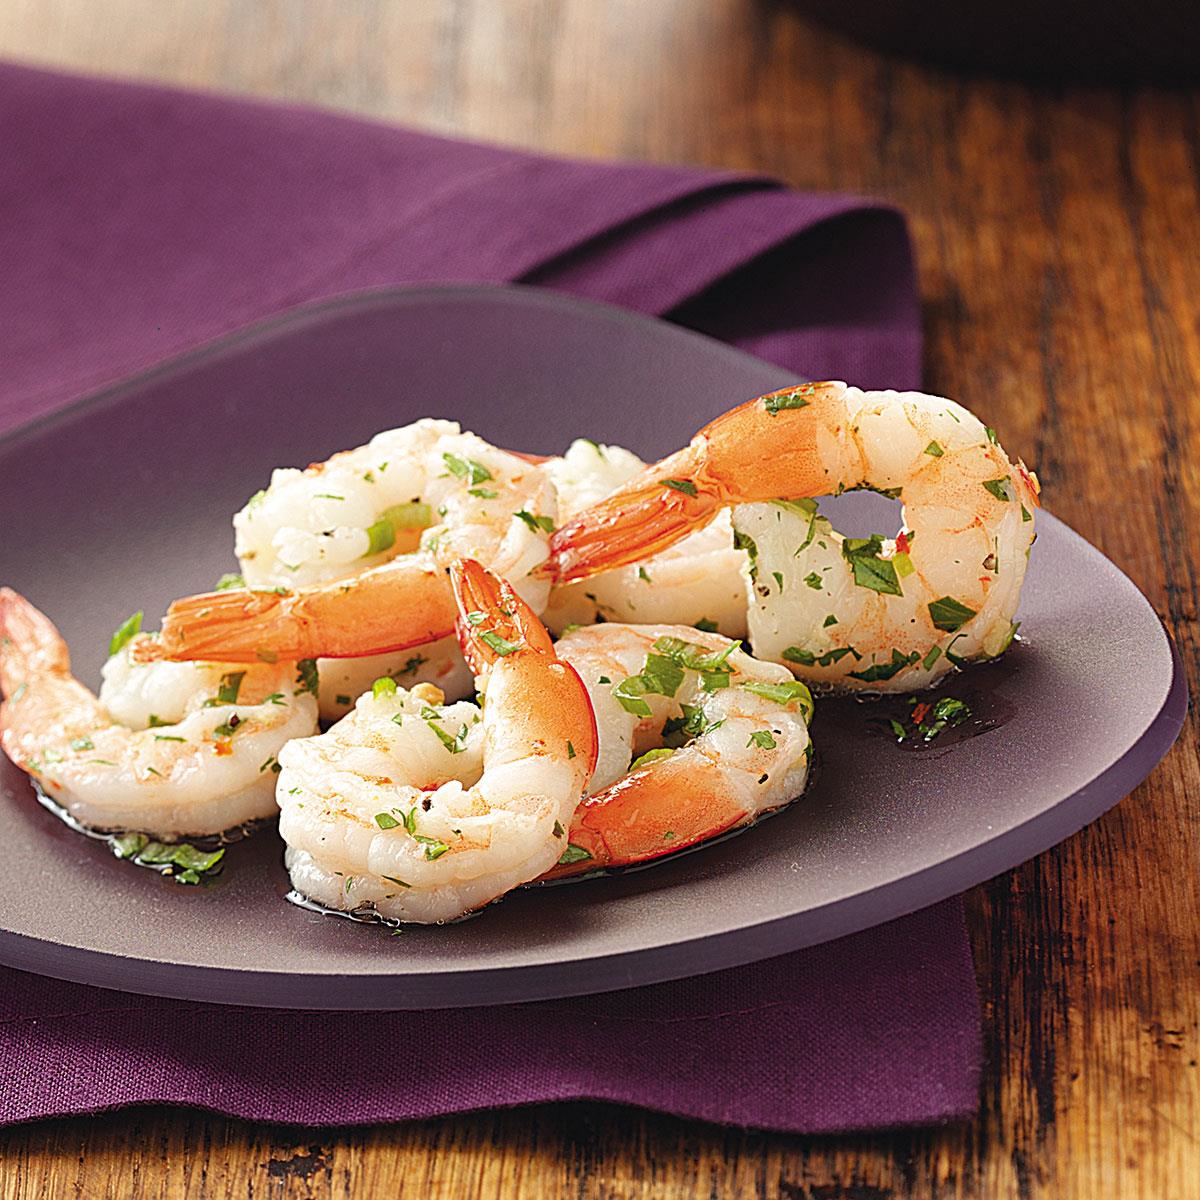 Marinated Shrimp Appetizer Cold : 8 Mistakes To Avoid When Cooking Shrimp : Fresh shrimp and boil with zatarain's crawfish, crab and shrimp boil in a large pot according to the package directions.